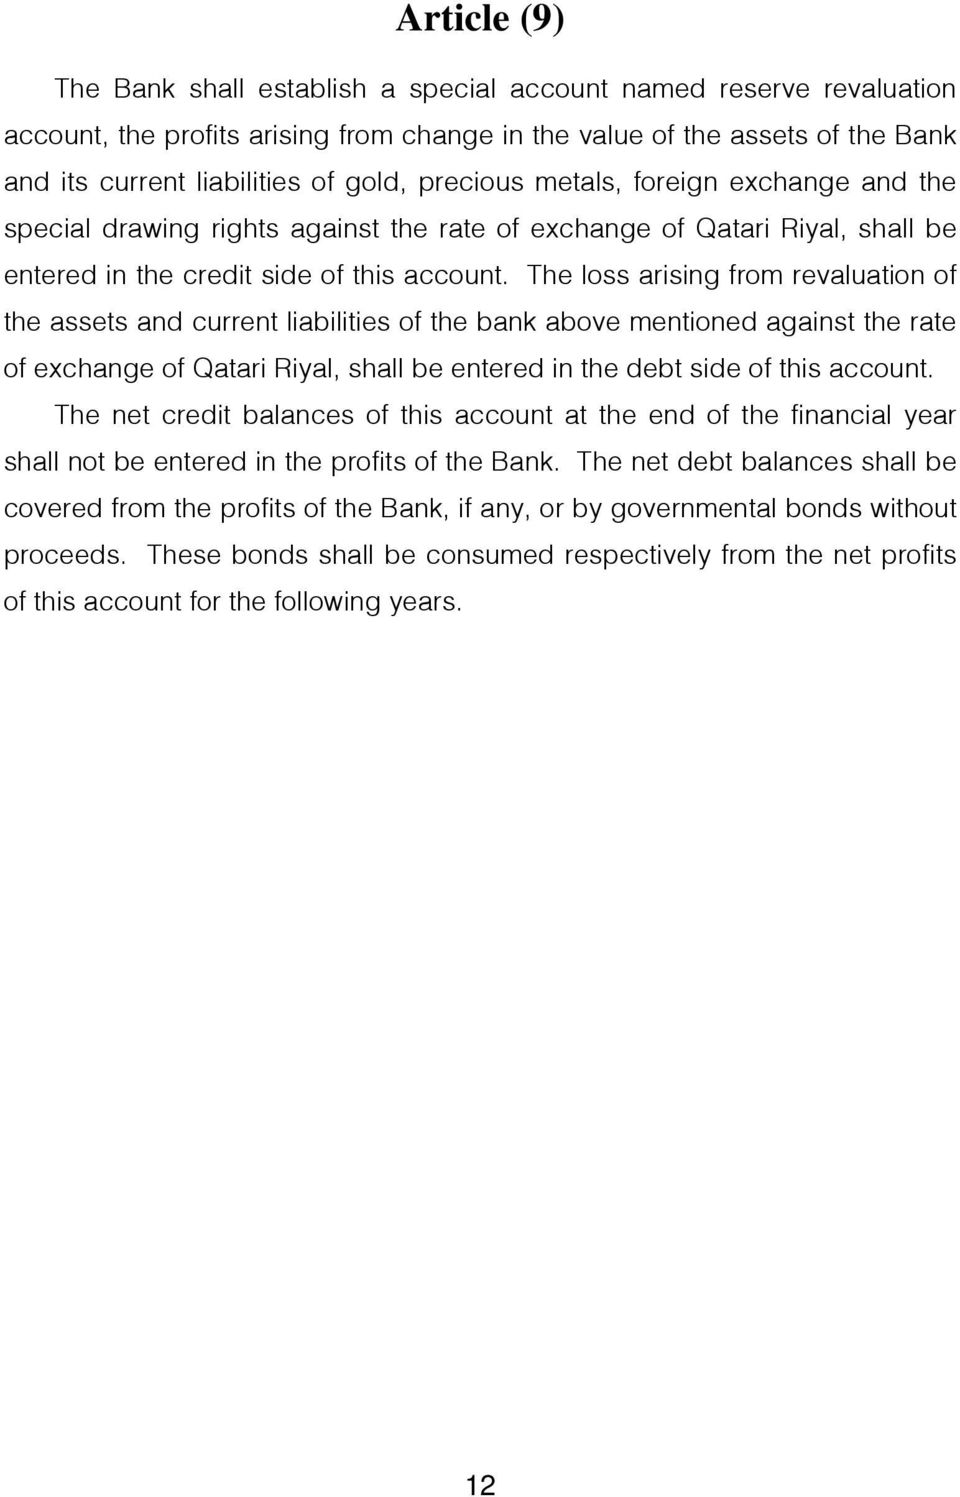 The loss arising from revaluation of the assets and current liabilities of the bank above mentioned against the rate of exchange of Qatari Riyal, shall be entered in the debt side of this account.